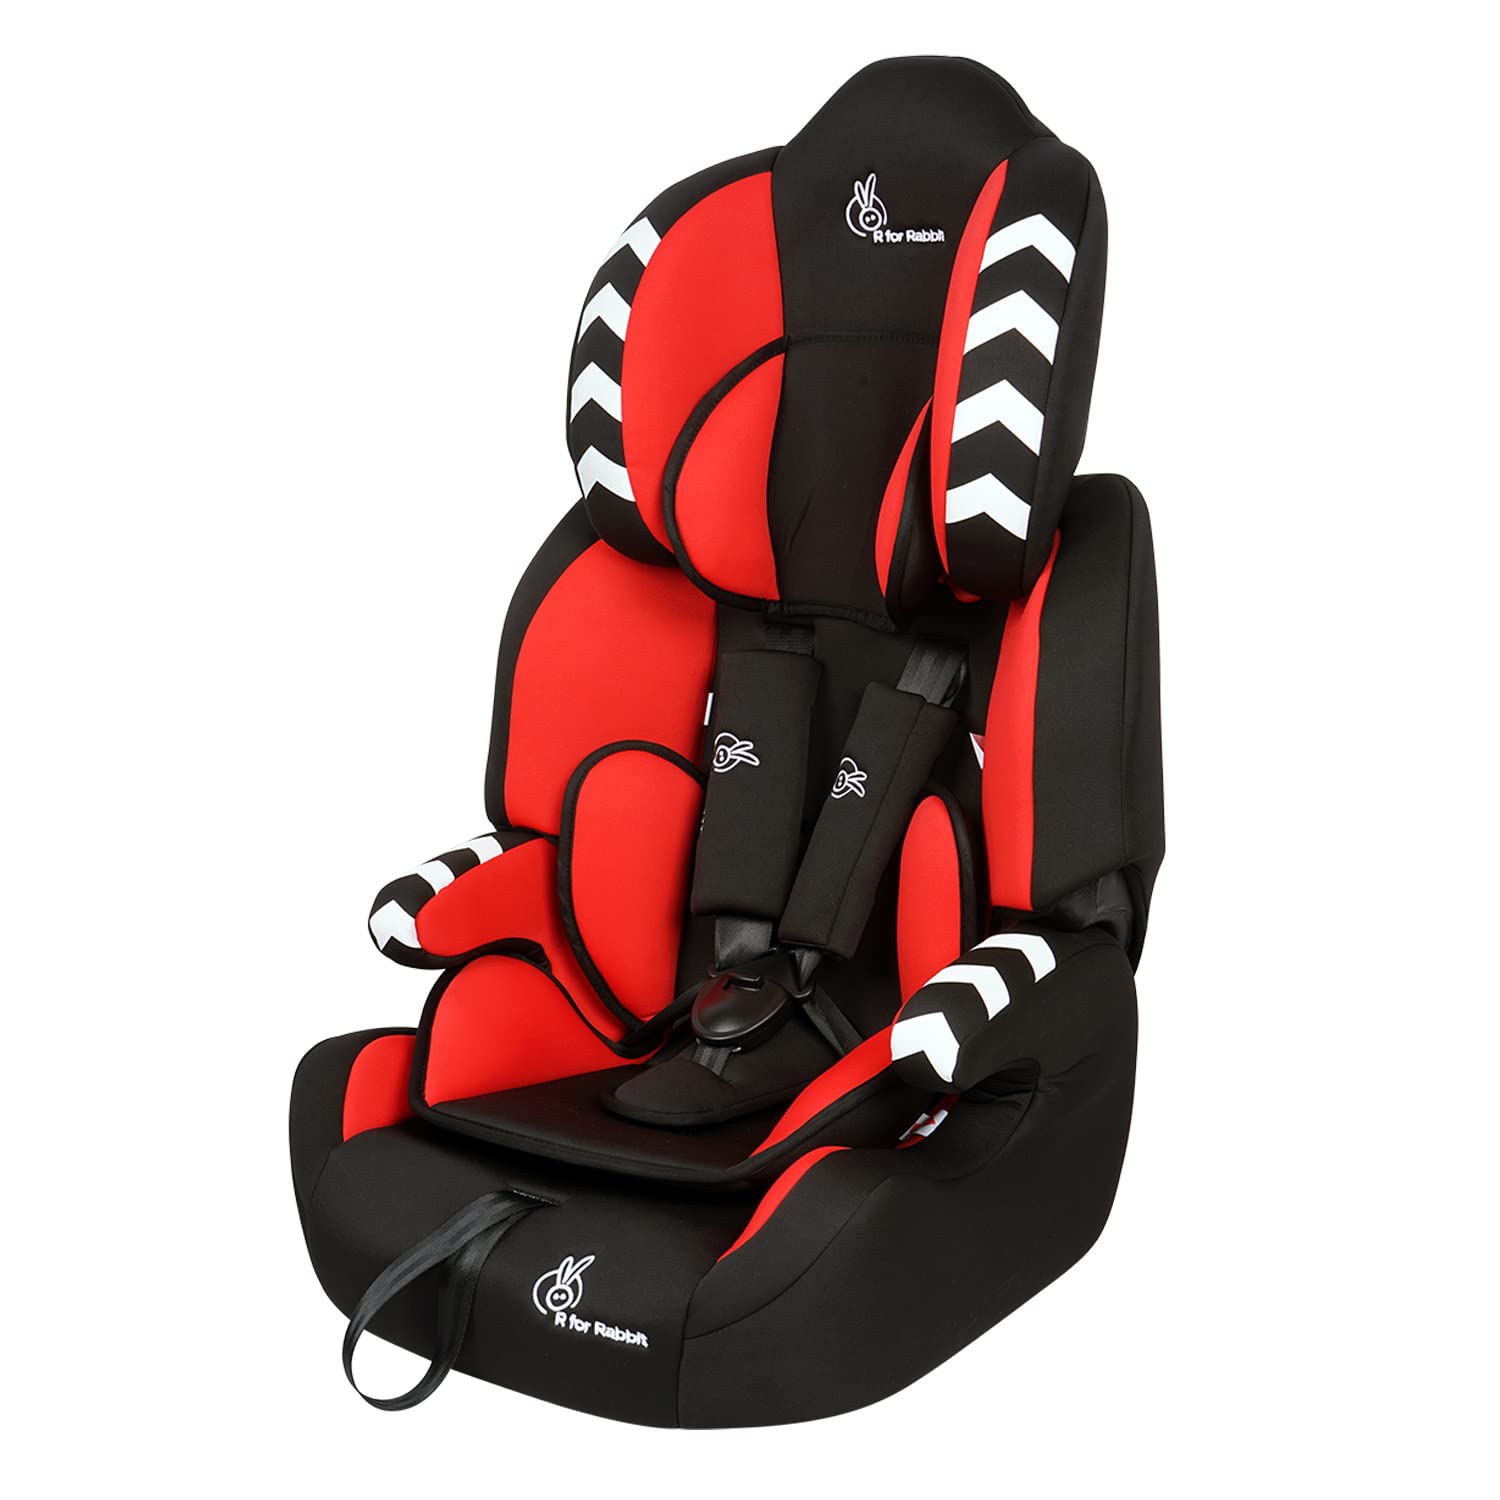 Jumping Jack Racer Baby Car Seat reviews in 2023